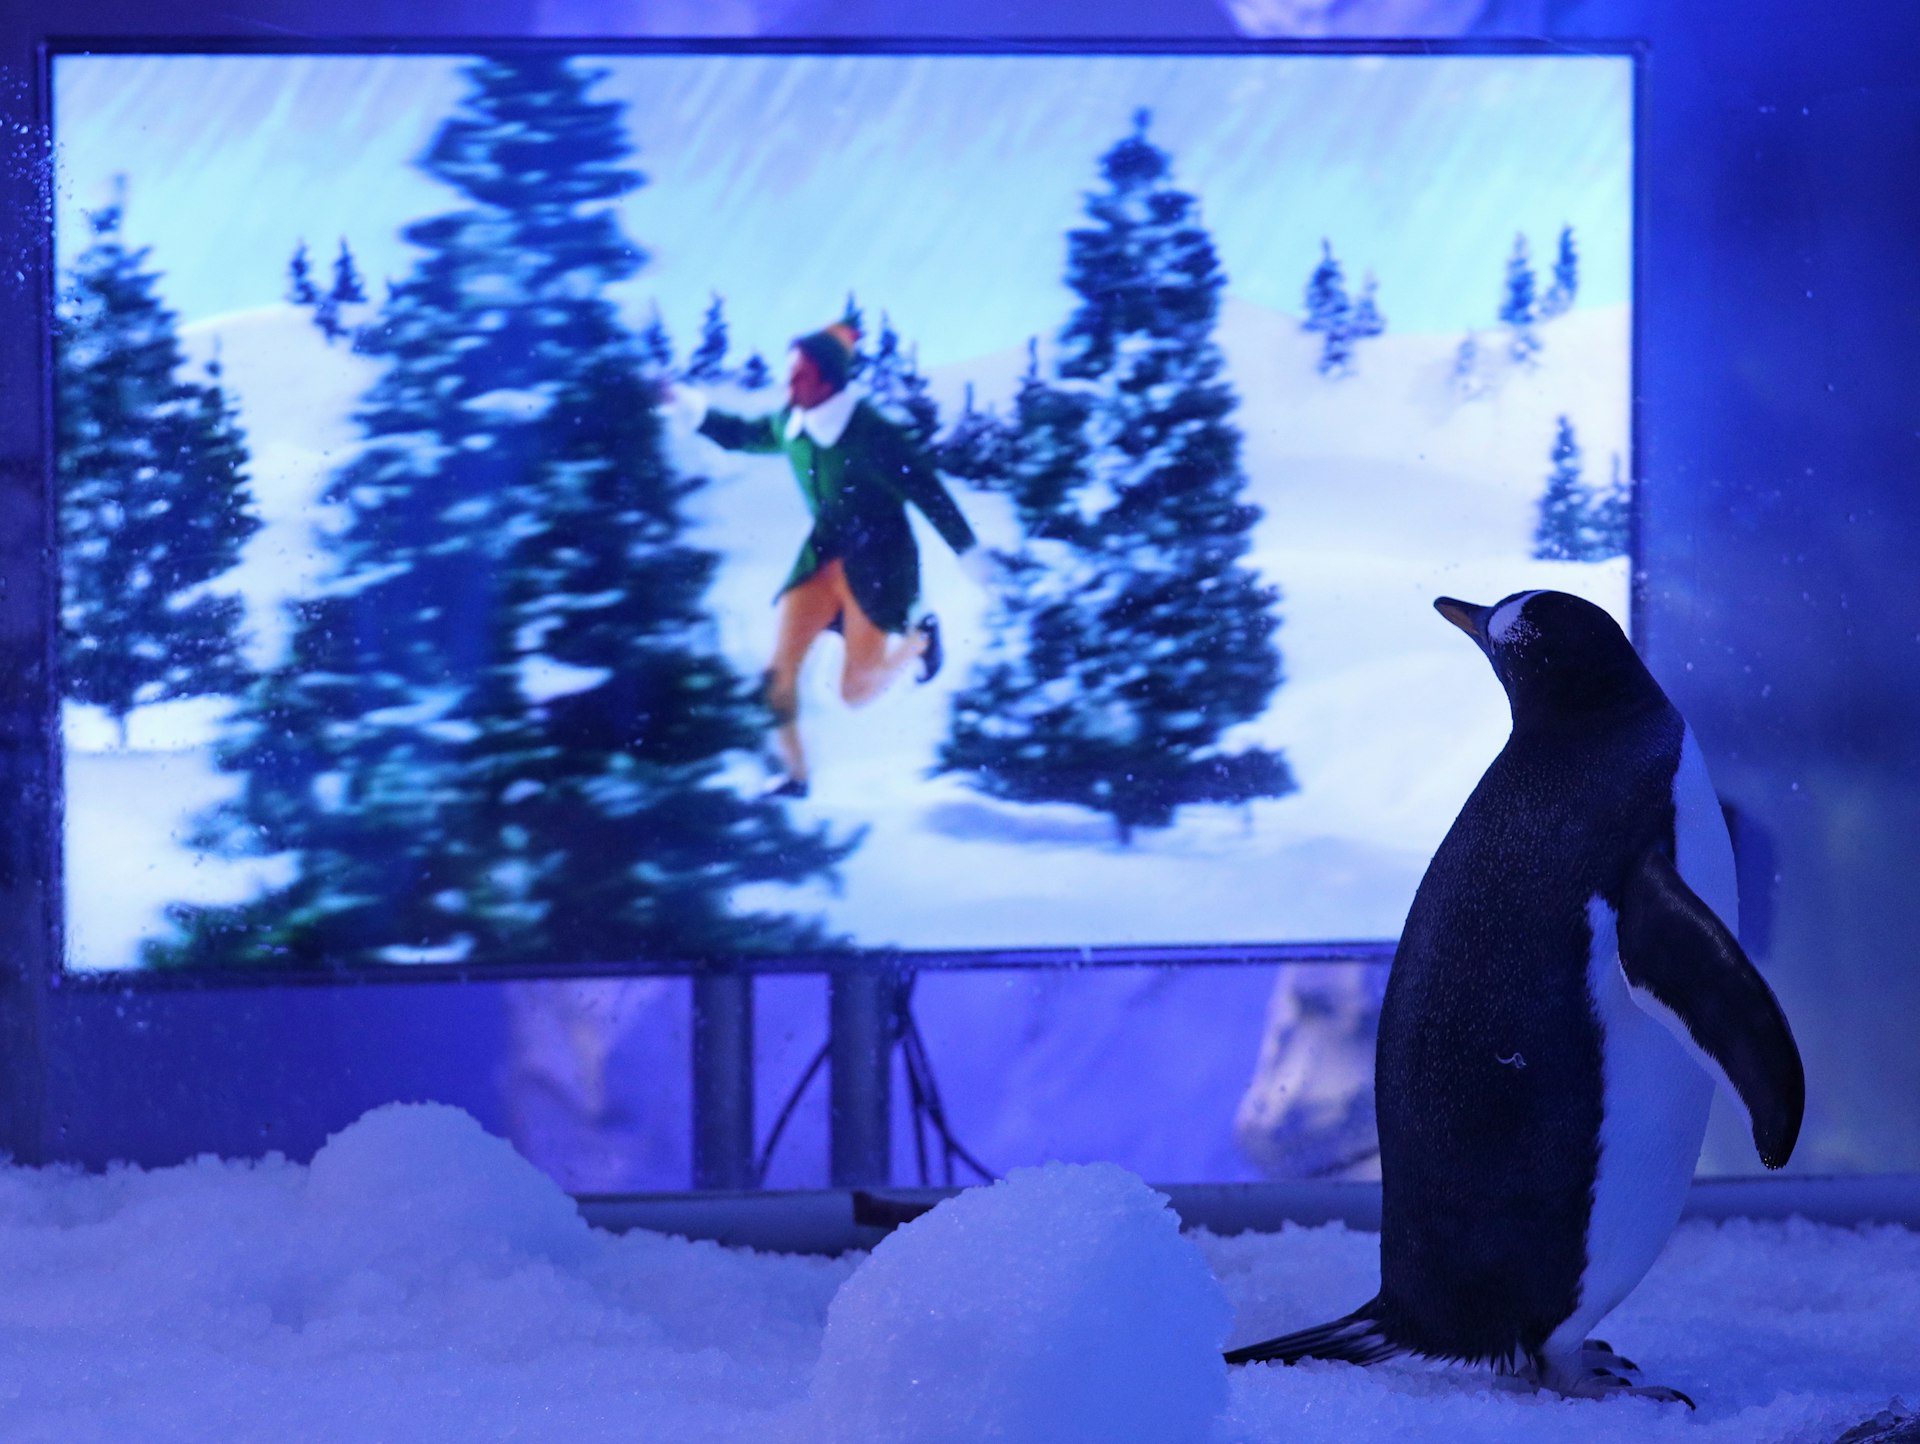 Penguin watched Elf on a giant screen